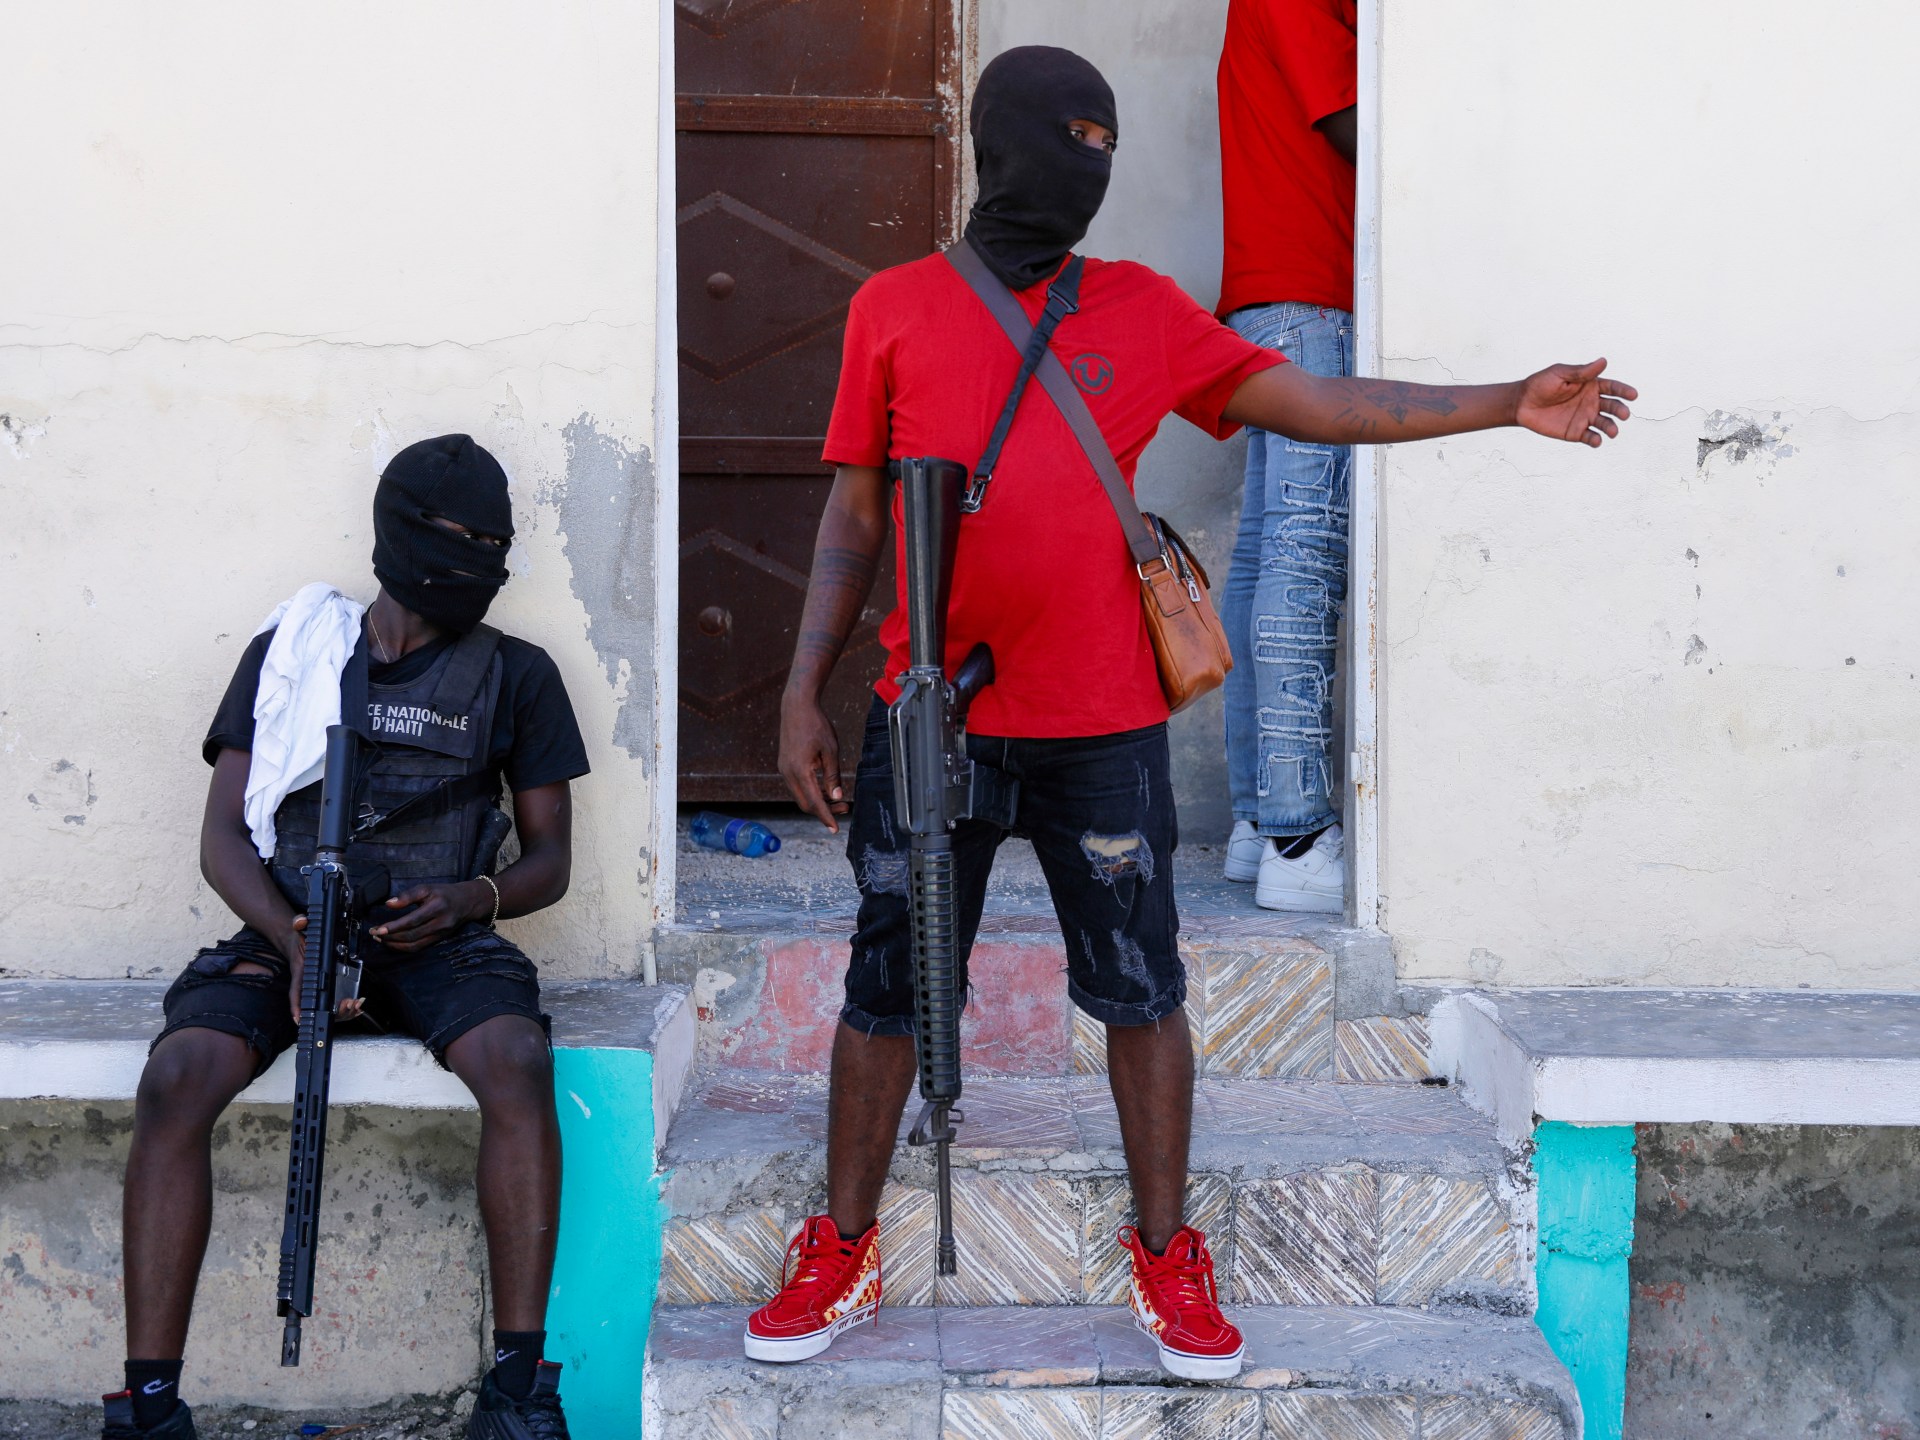 Haitian capital ‘paralysed’ by wave of violence